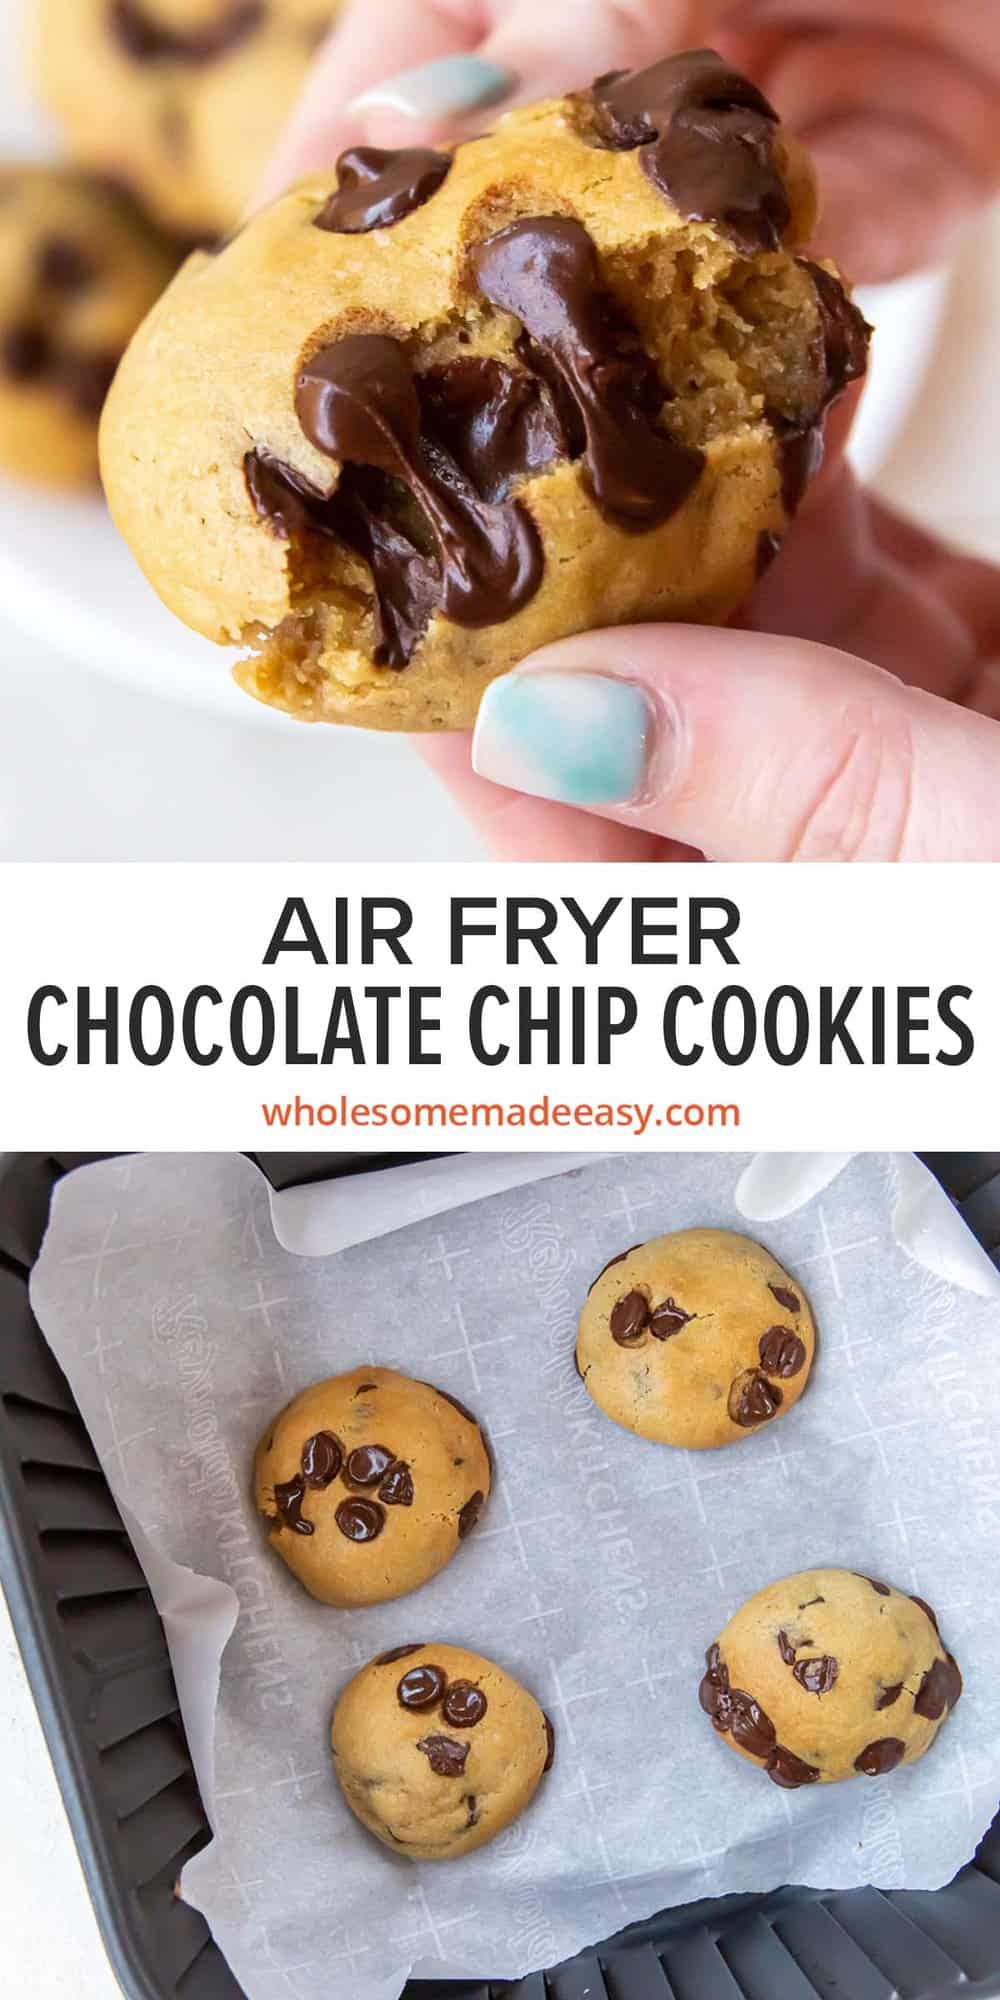 Hand breaking a chocolate chip cookie in half and cookie dough in an air fryer basket with text.